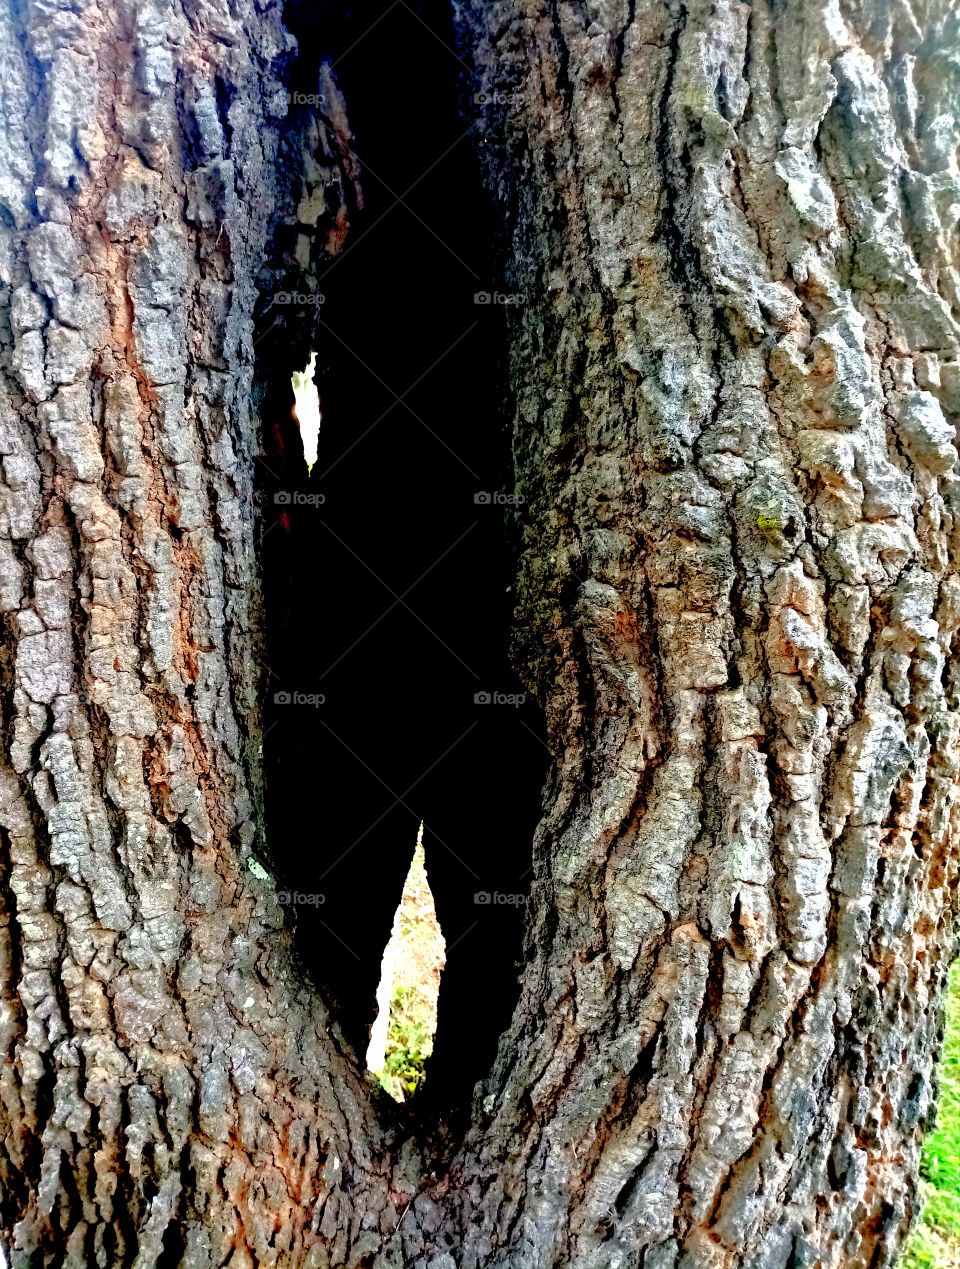 Trees and bark